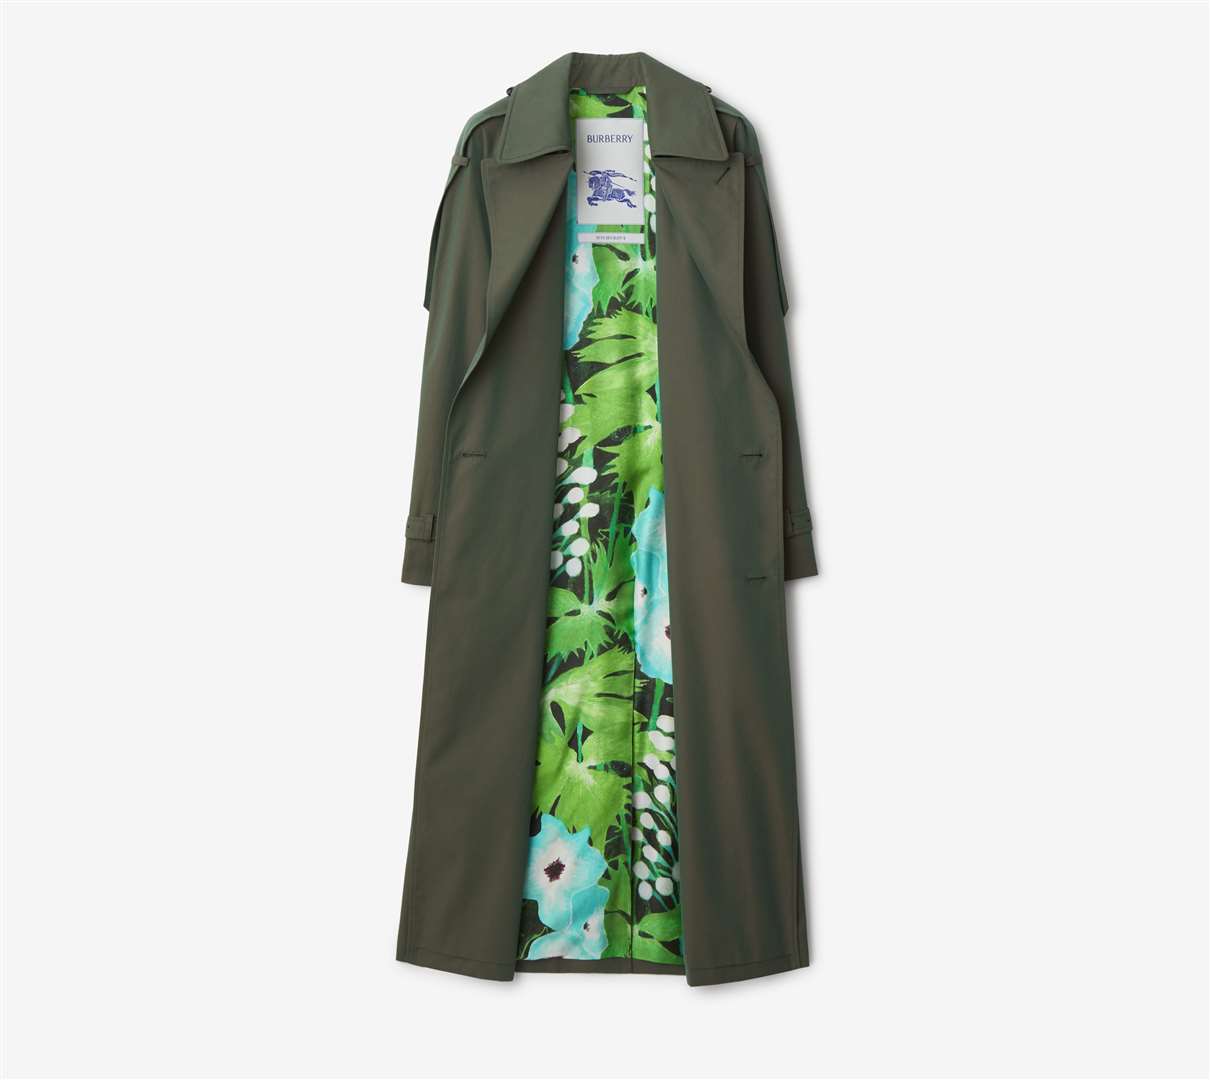 The Burberry Trench coat in Ivy in collaboration with Highgrove featuring a wildflower meadow lining (Burberry/PA)